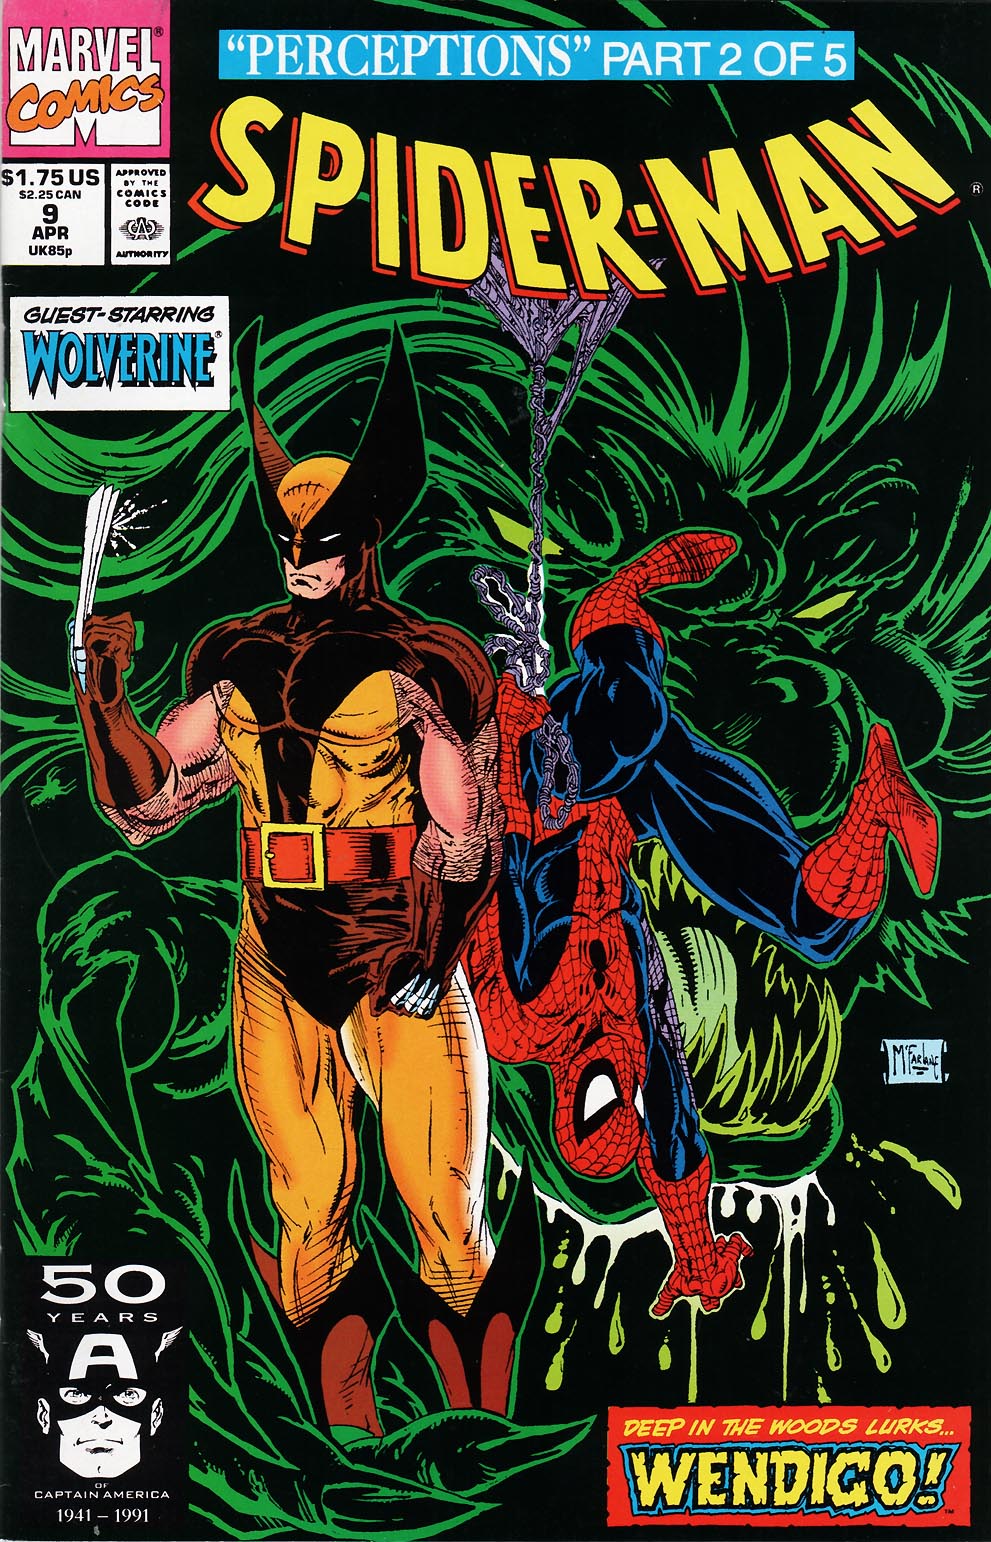 Read online Spider-Man (1990) comic -  Issue #9 - Perceptions Part 2 of 5 - 1